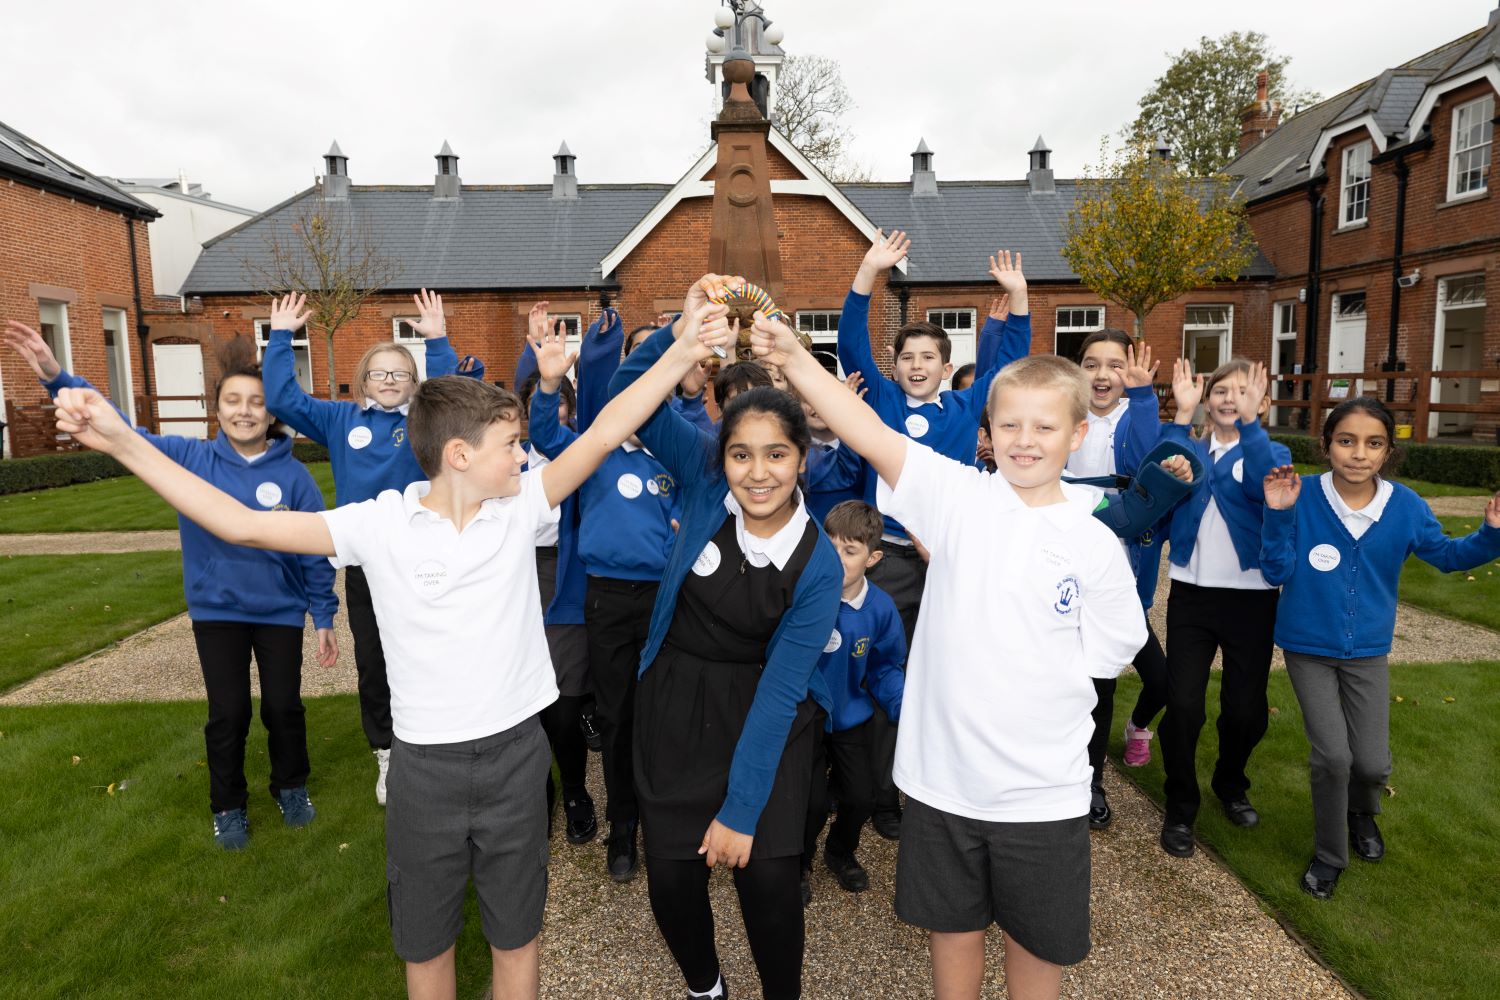 A group of primary school pupils in the courtyard of the National Horseracing Museum. The children at the front together hold a set of keys.